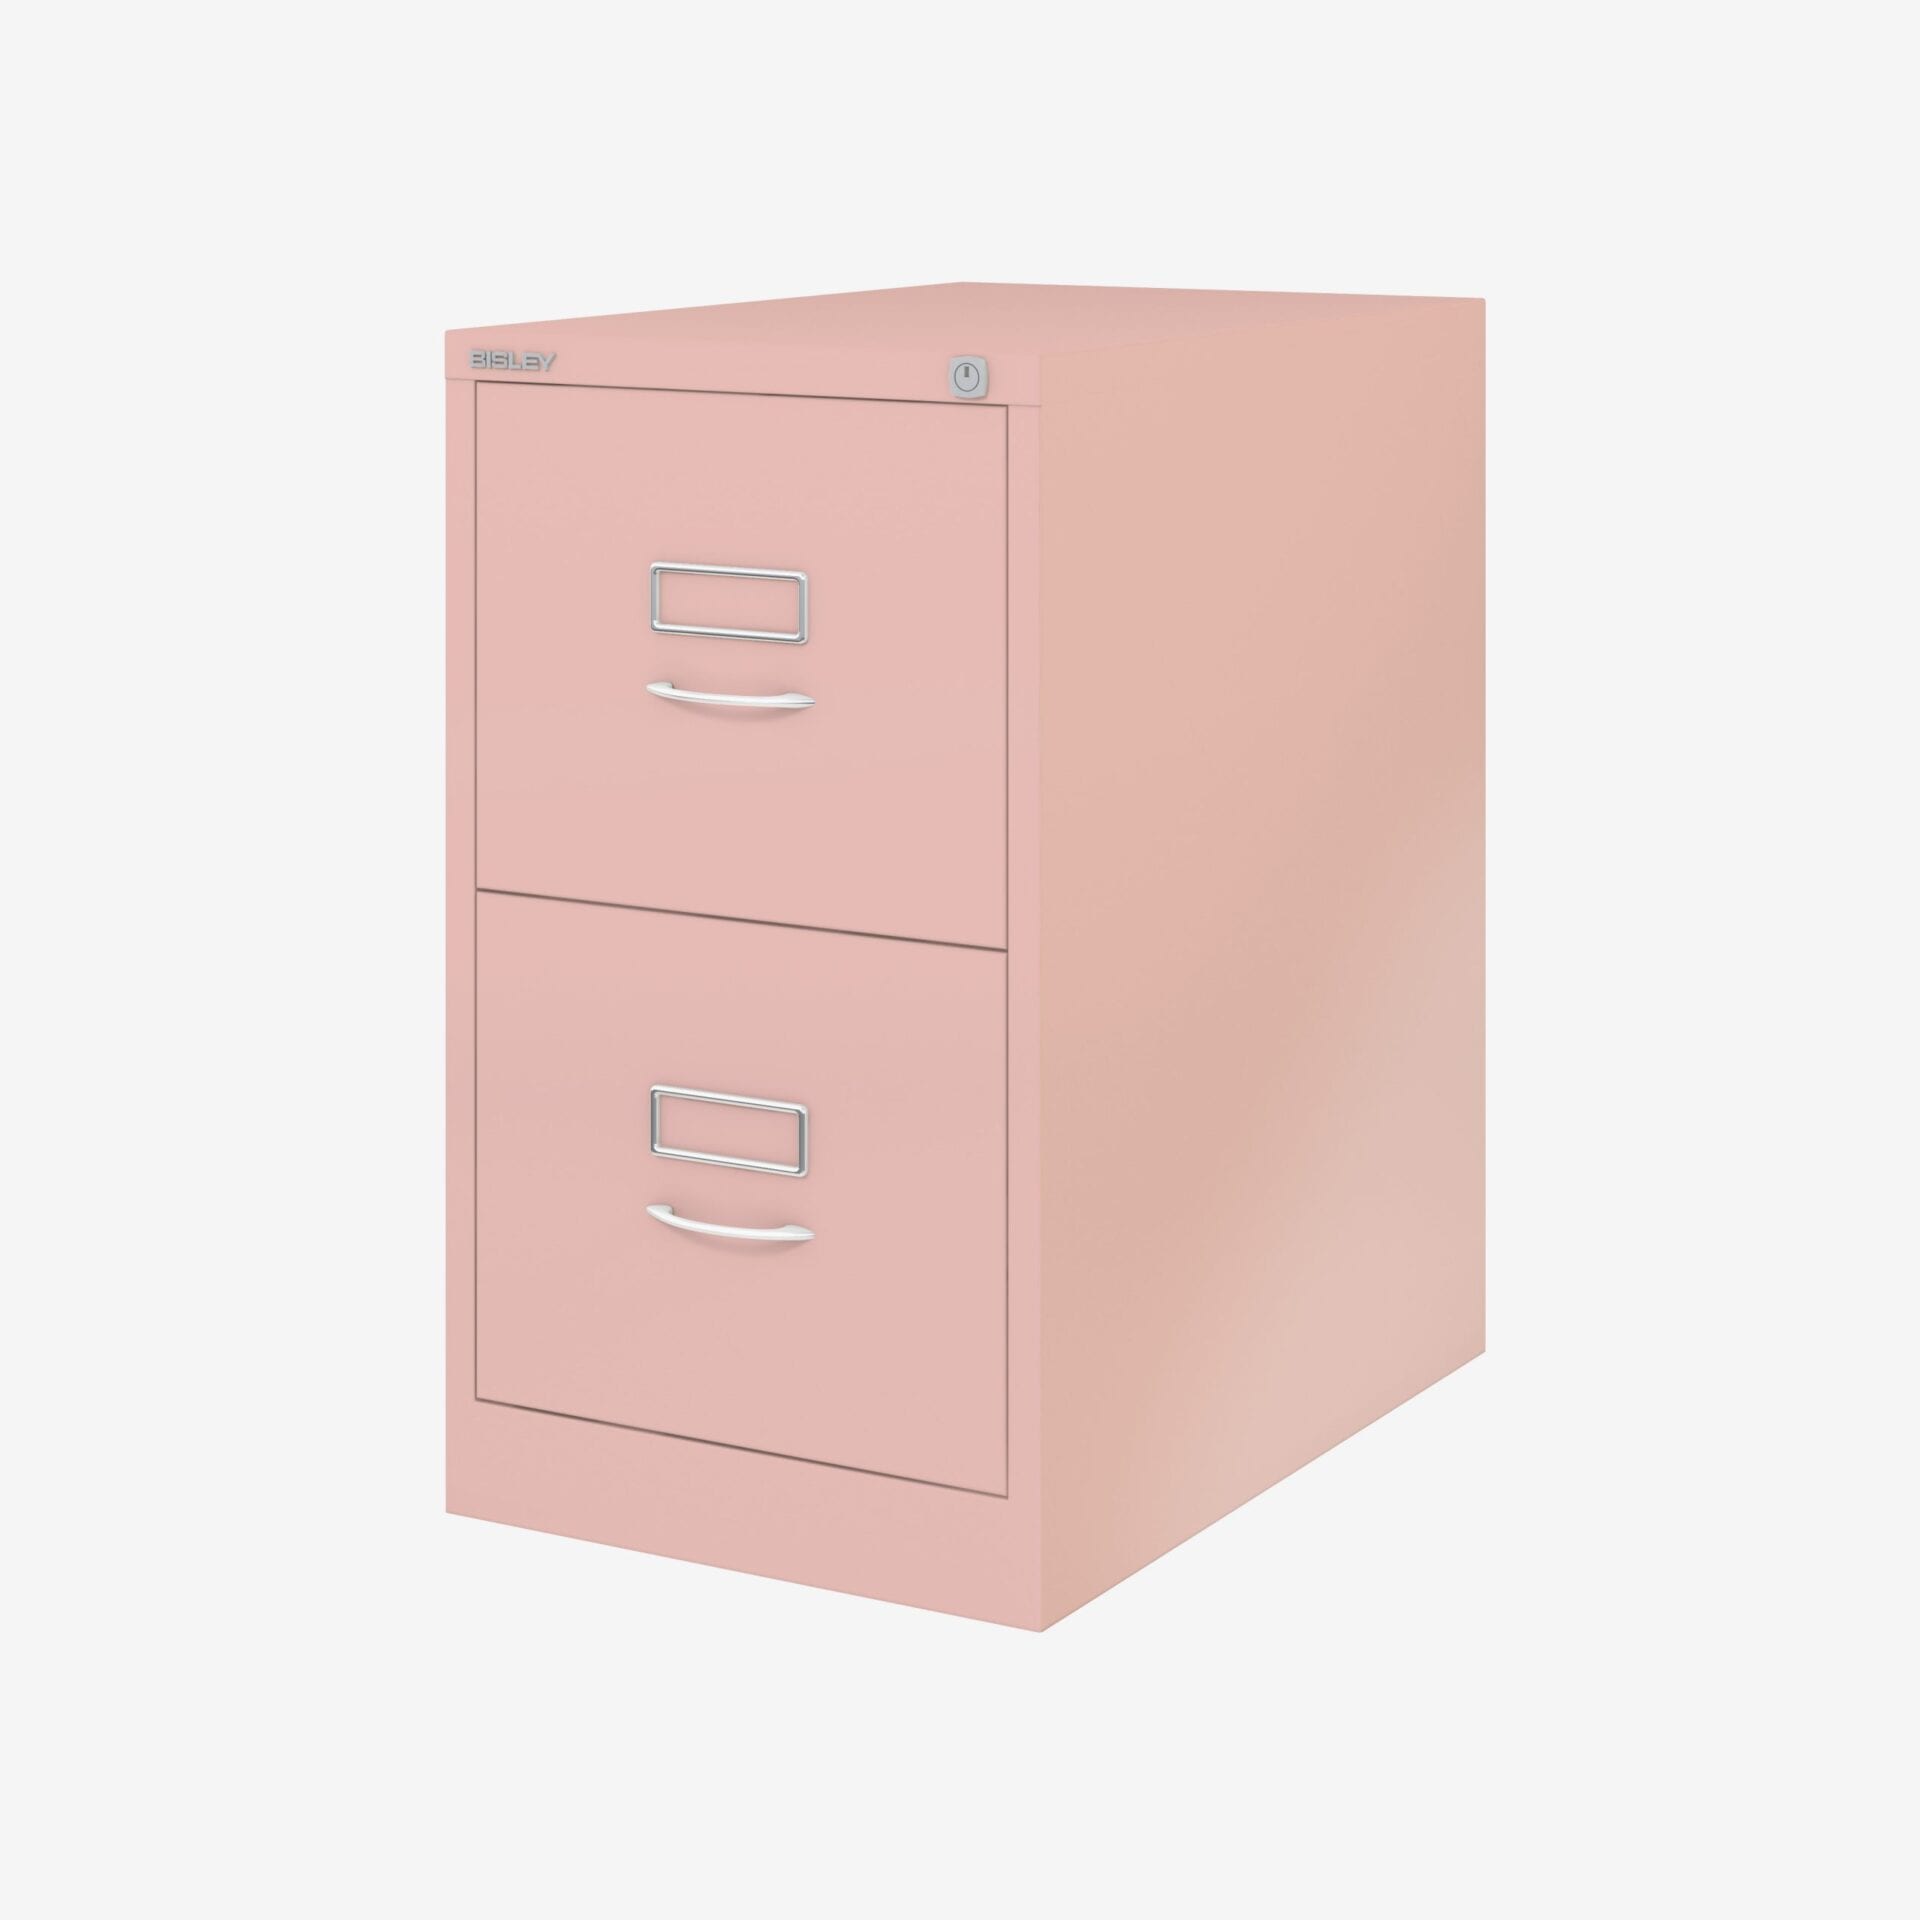 Bisley 2 Drawer Filing Cabinet Compact & Understated Design. Small White Office Cabinet for the Home with Lockable Metal Filing Drawers for Easy Storage and Organisation of A4 Suspension Files 